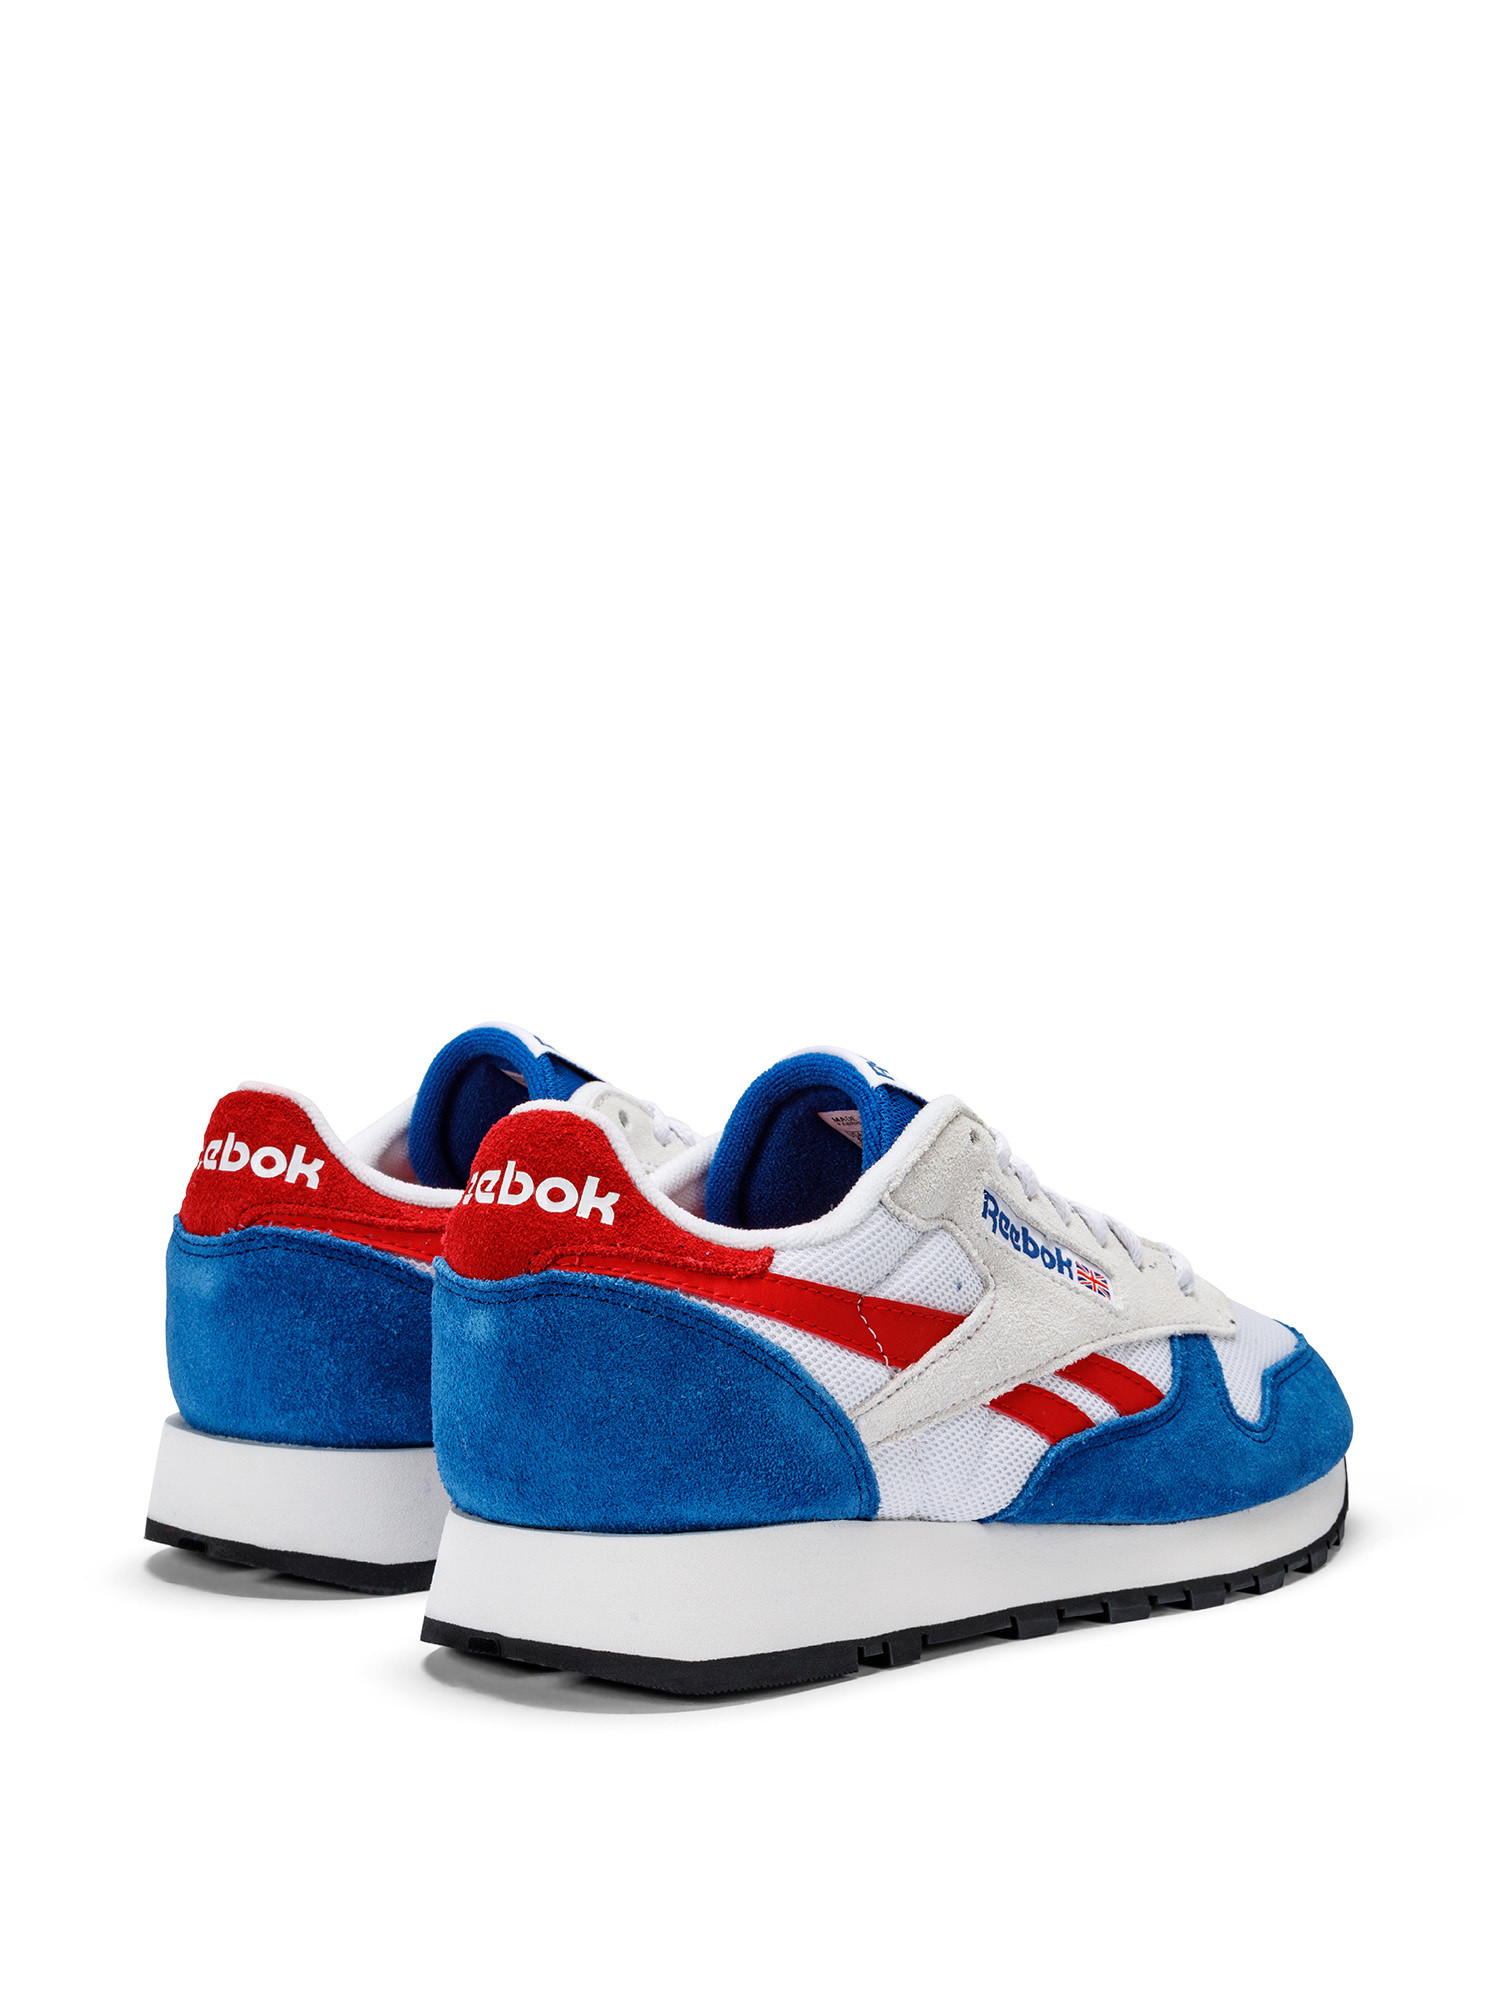 Reebok - Classic Leather Shoes Make It Yours, Blue, large image number 2